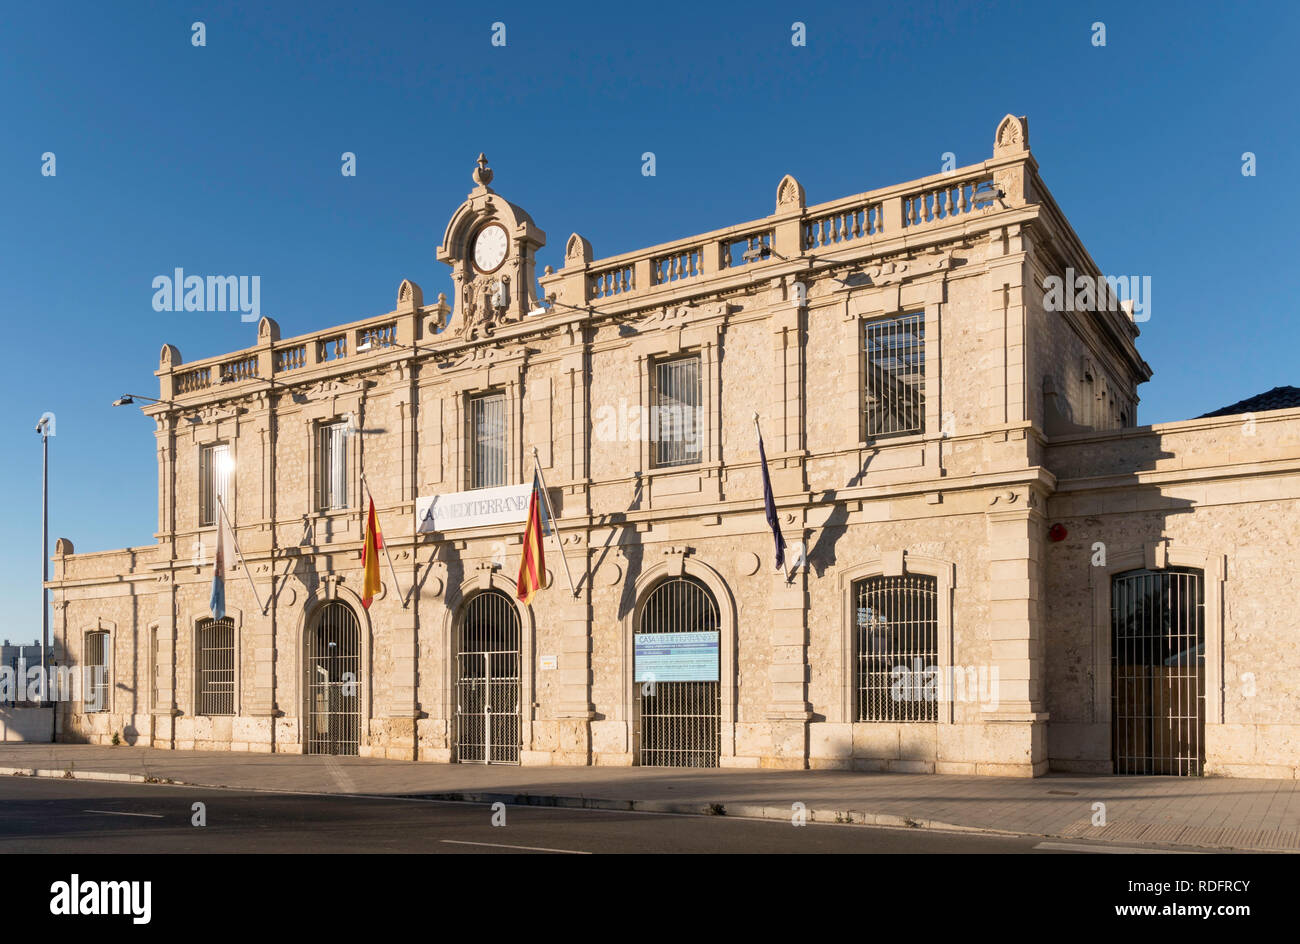 La Casa del Mediterráneo, conference centre within the old railway station in Alicante, Spain, Europe Stock Photo